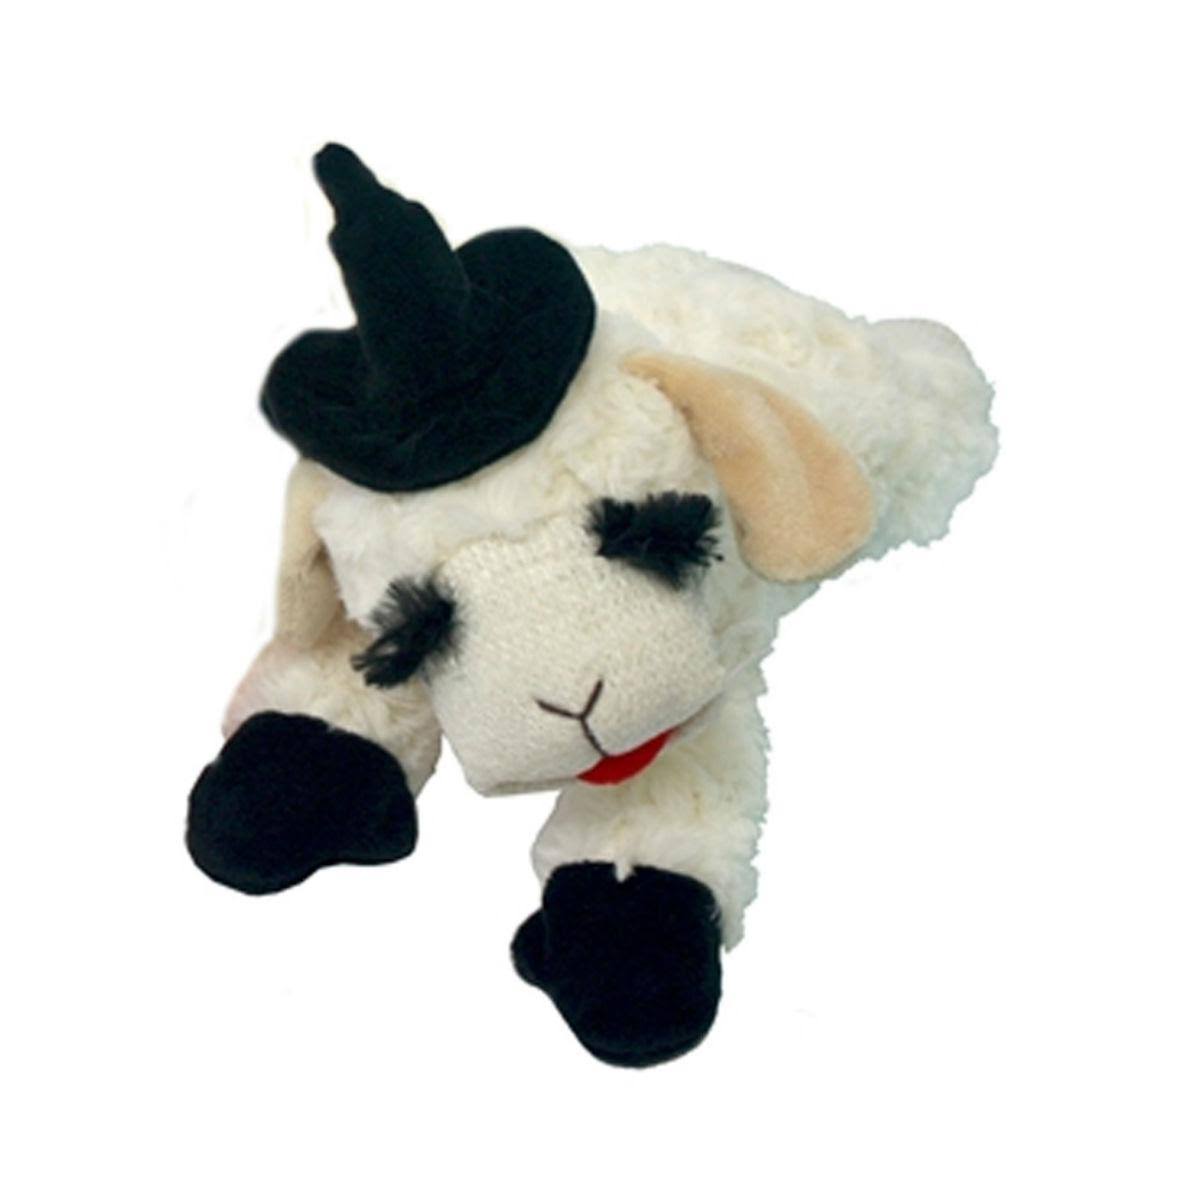 Multipet Halloween Lamb Chop Dog Toy - Black Witches Hat - Small